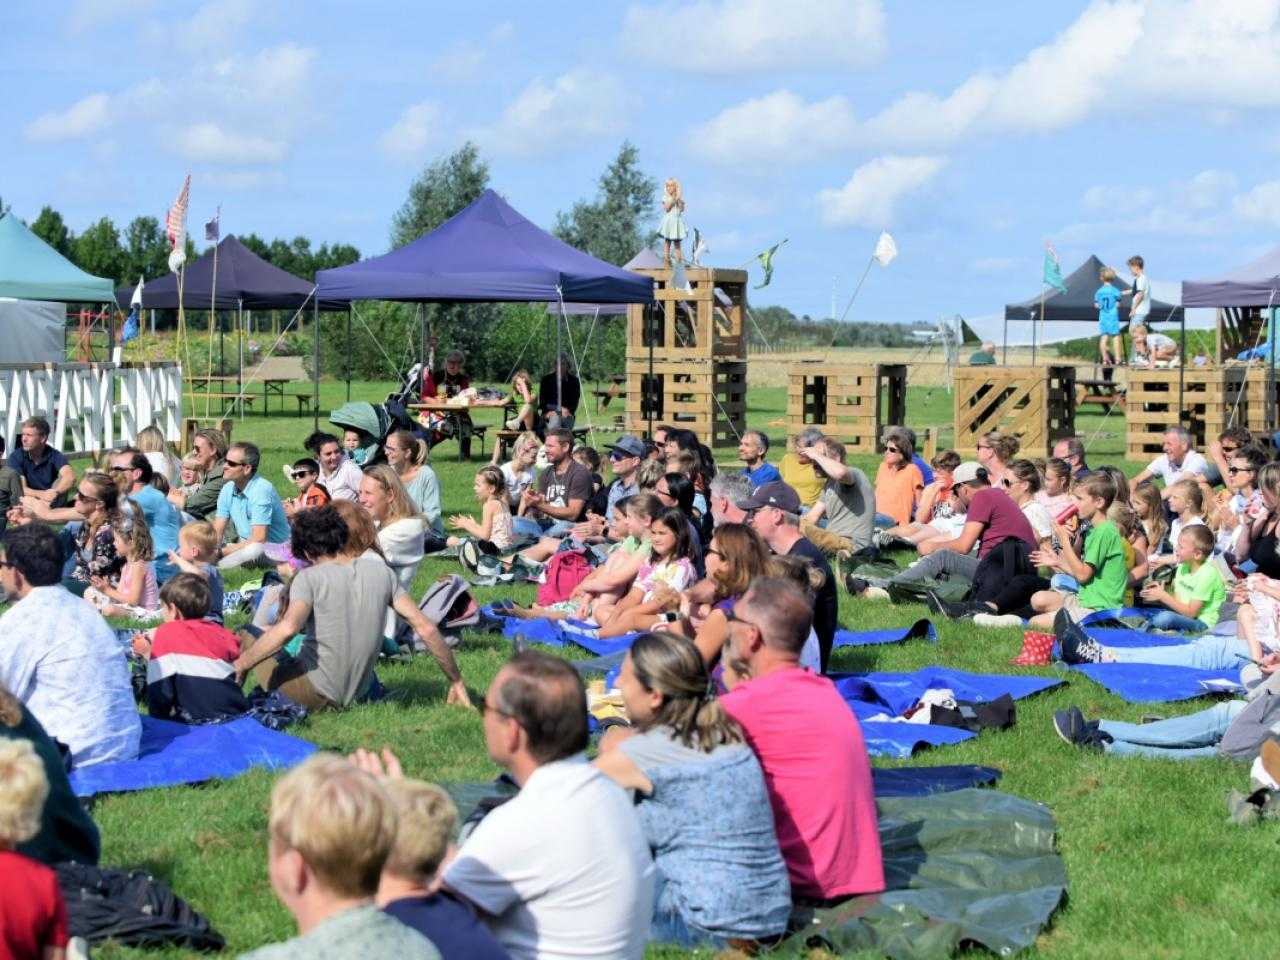 Festival site with seated visitors of the Grazende Zwaan